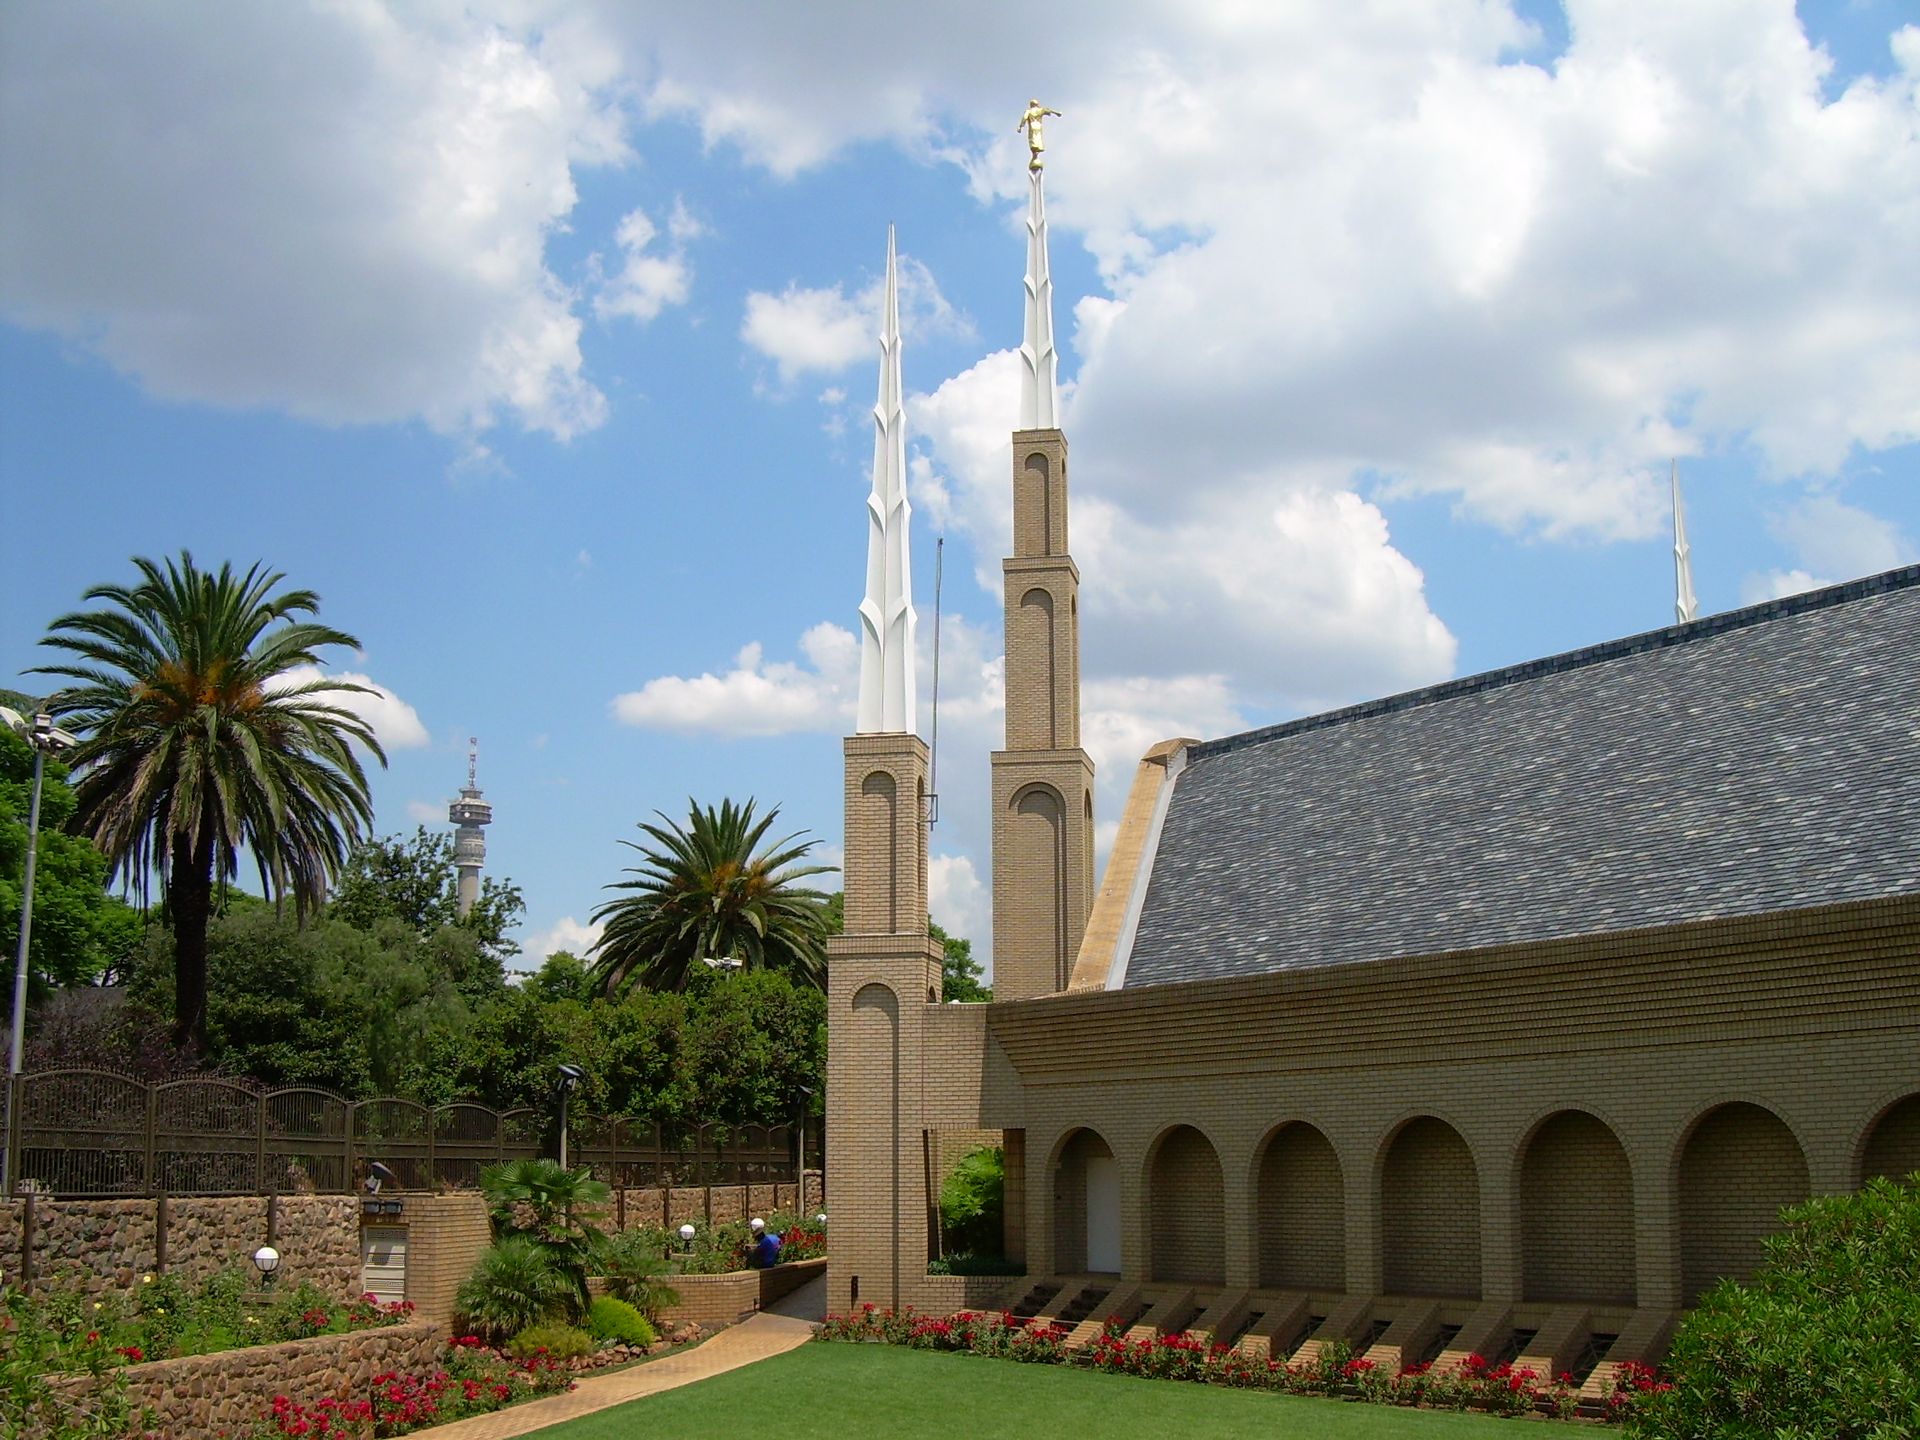 The Johannesburg South Africa Temple spires, including side view and scenery.